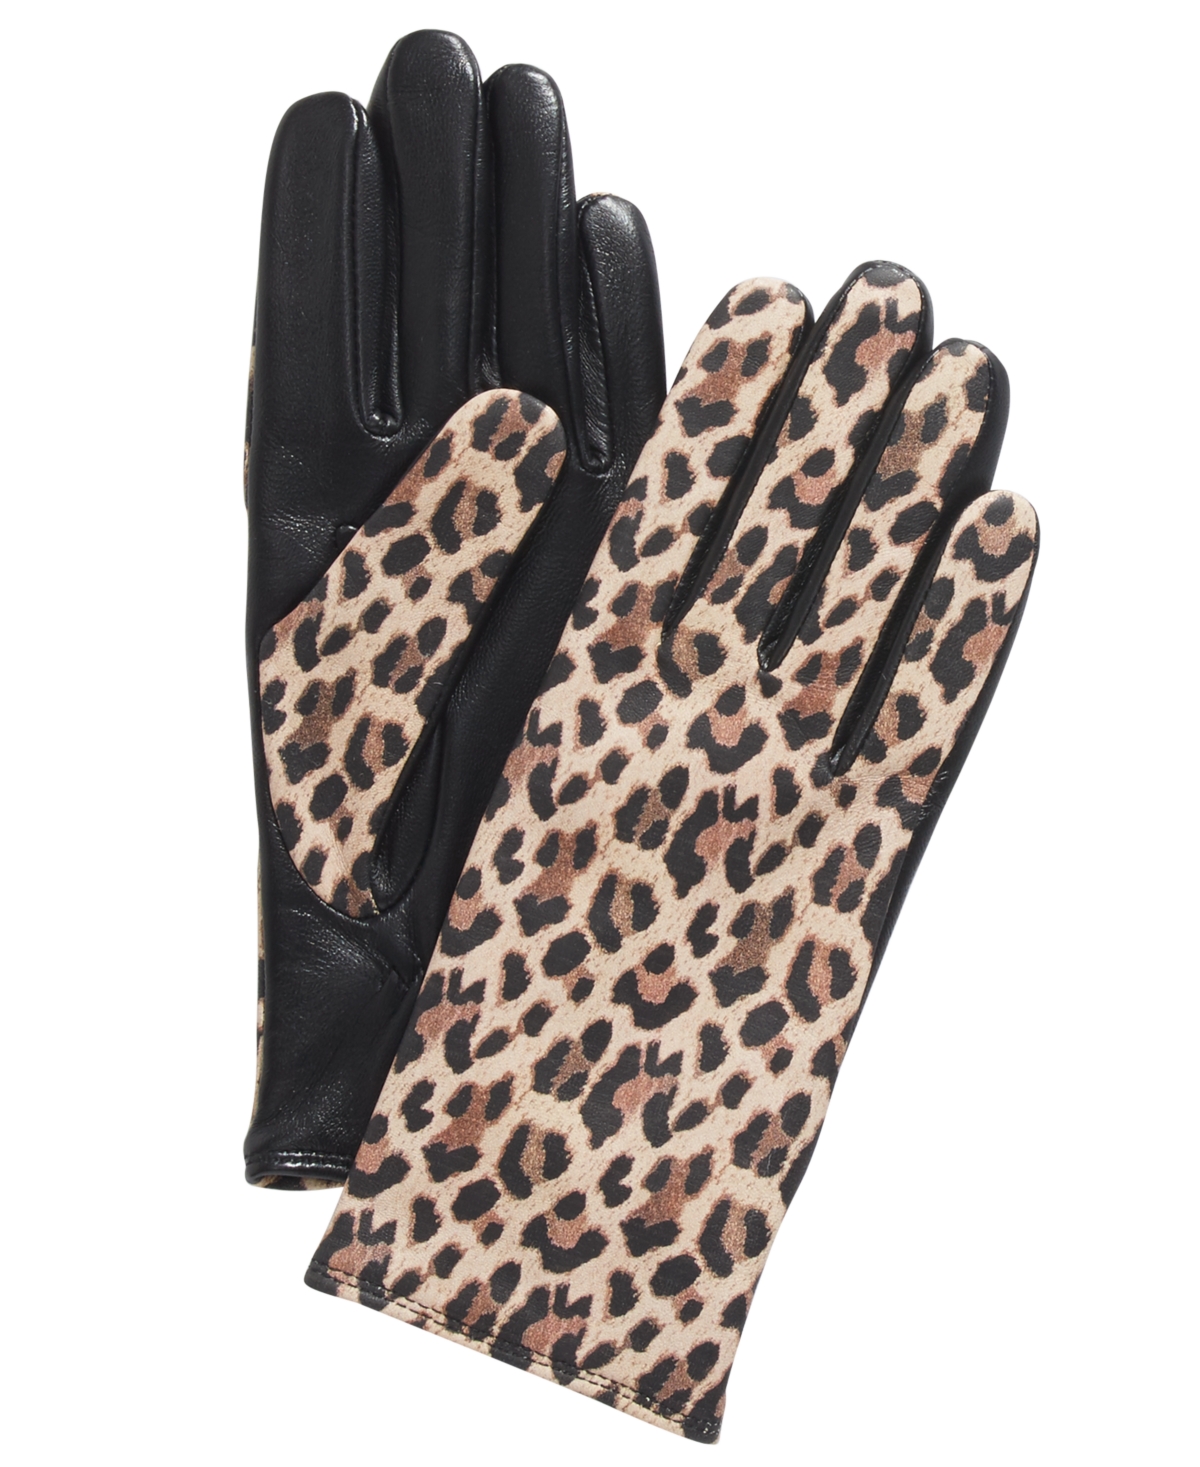 Cashmere Lined Leather Tech Gloves, Created for Macy's - Leopard Print